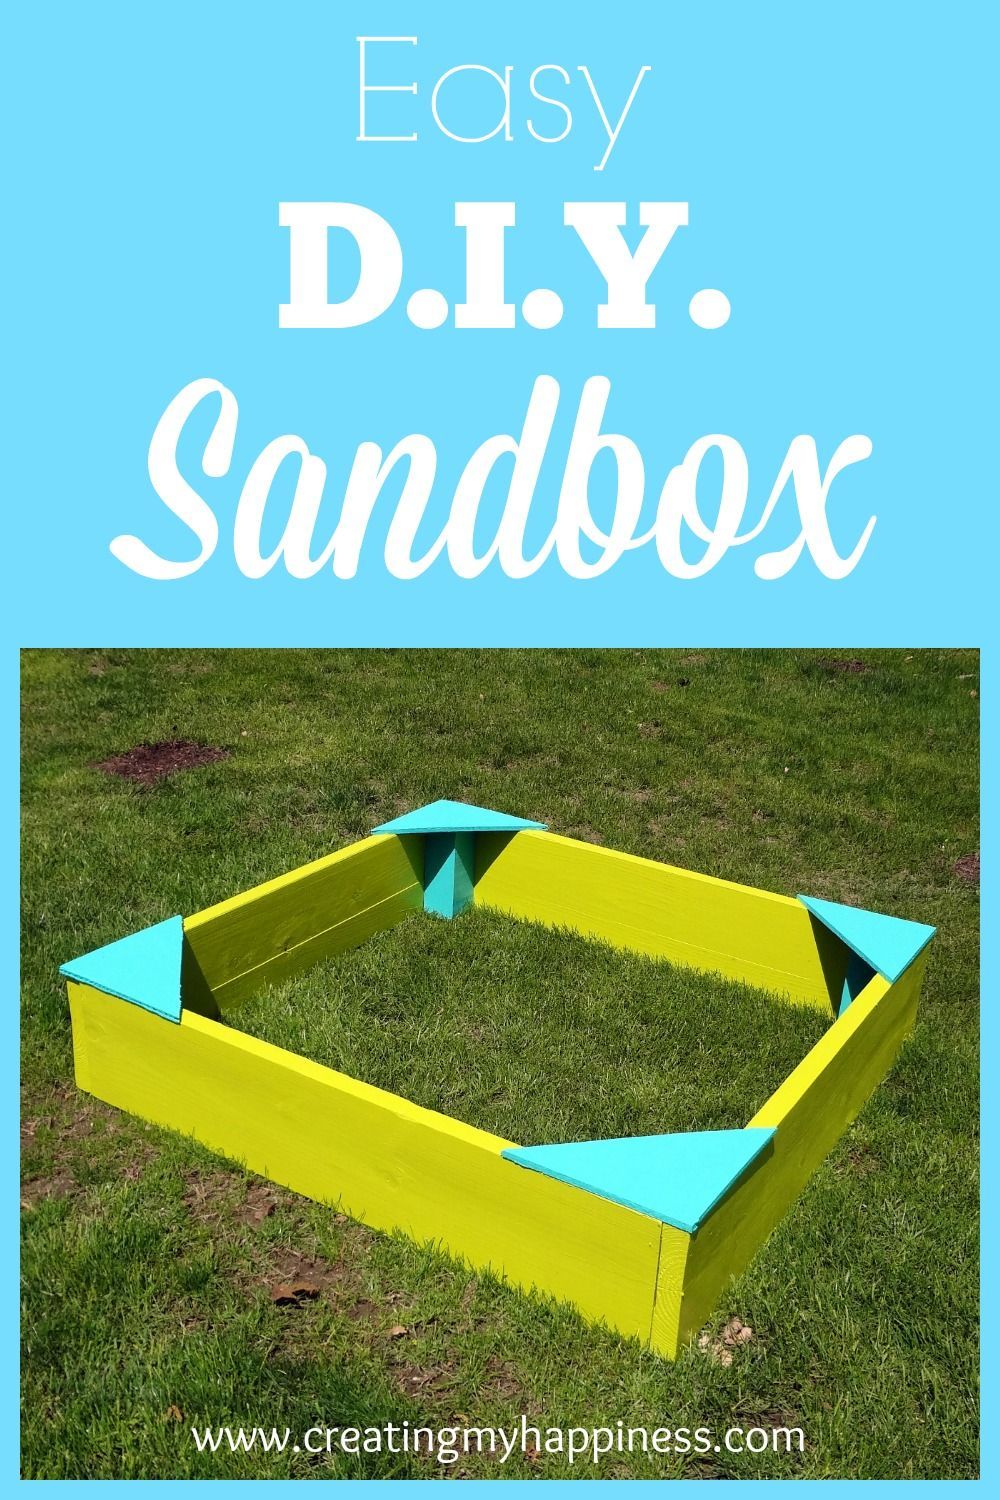 I’m not a builder by any means, but this DIY sandbox was incredibly easy to put together and it was a big